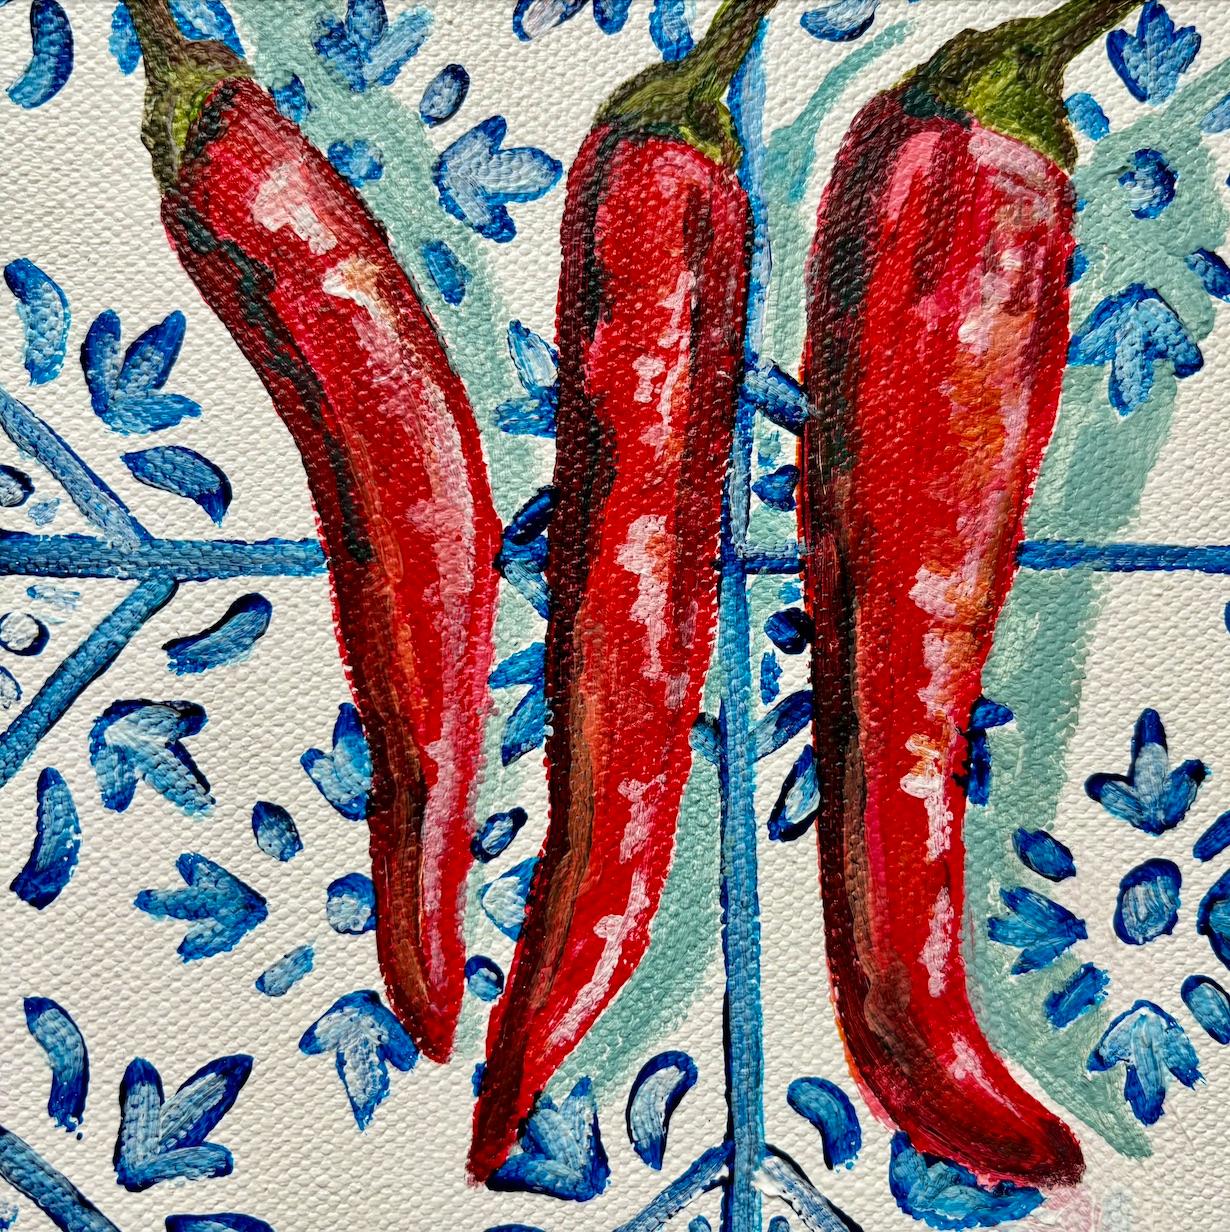 Three Chillis on Tiles - Contemporary Painting by Pippa Smith